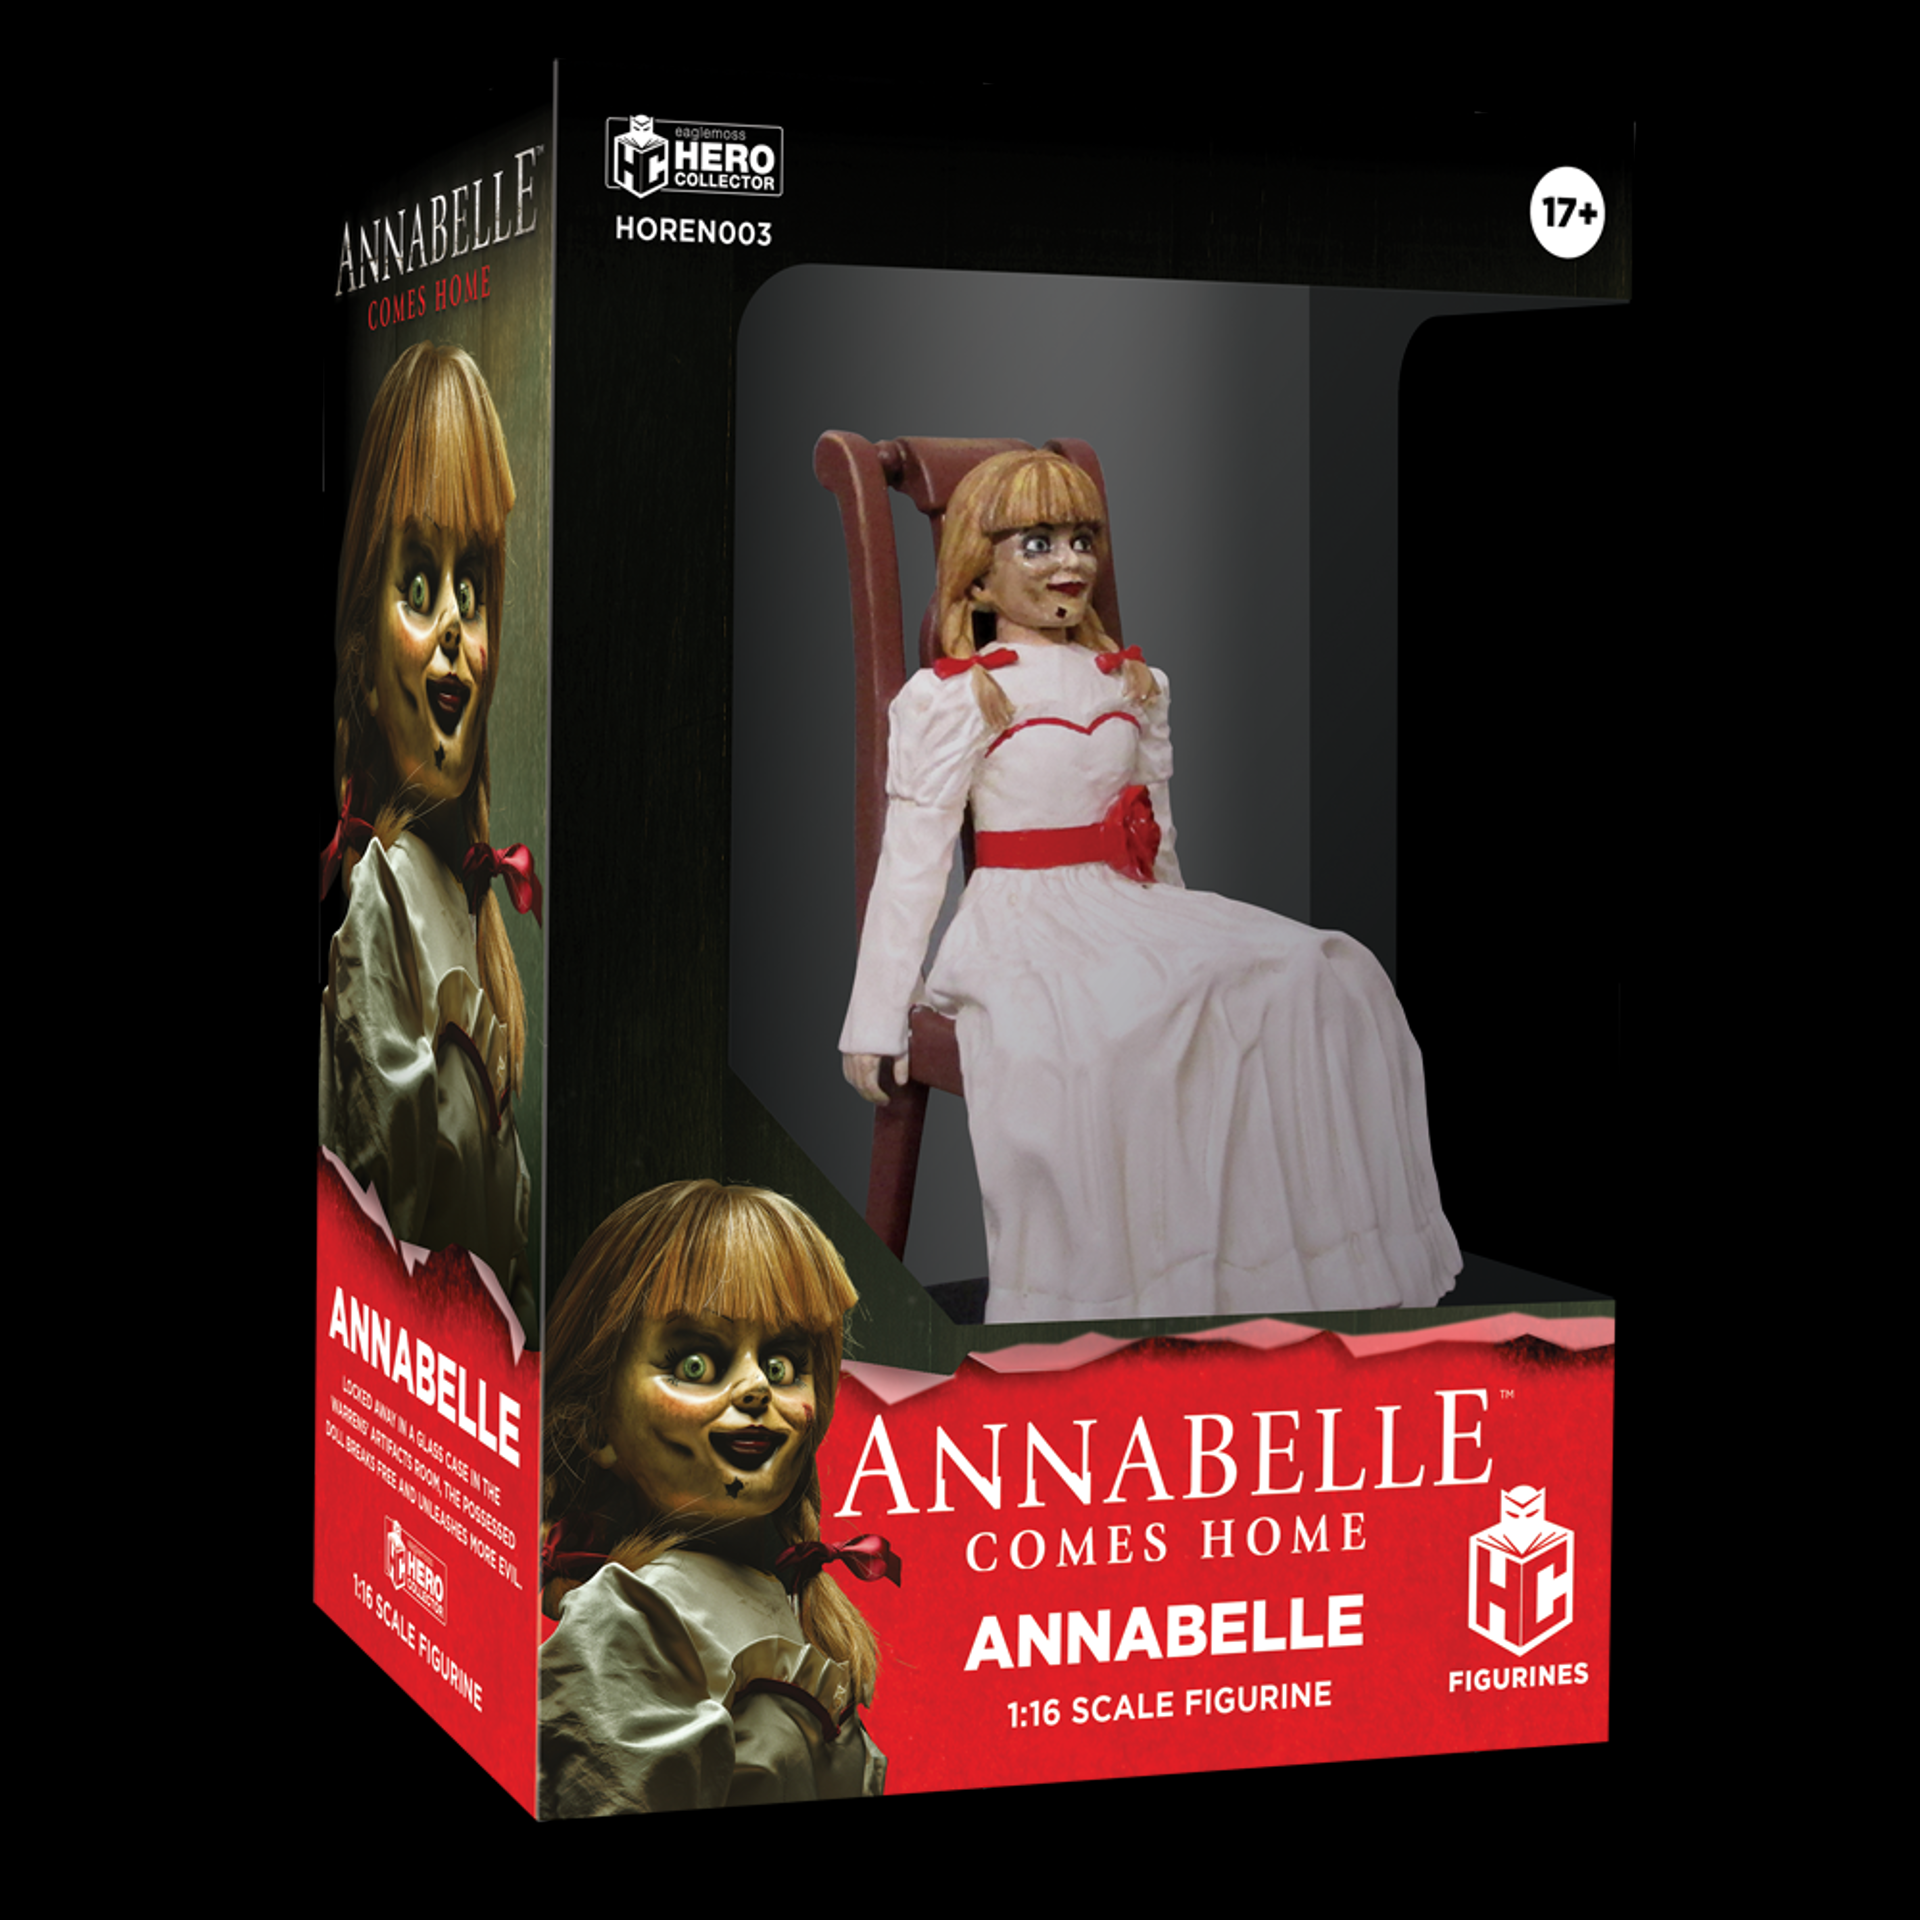 Acheter The Conjuring - Figurine d'Annabelle (Annabelle) - Figurines prix  promo neuf et occasion pas cher